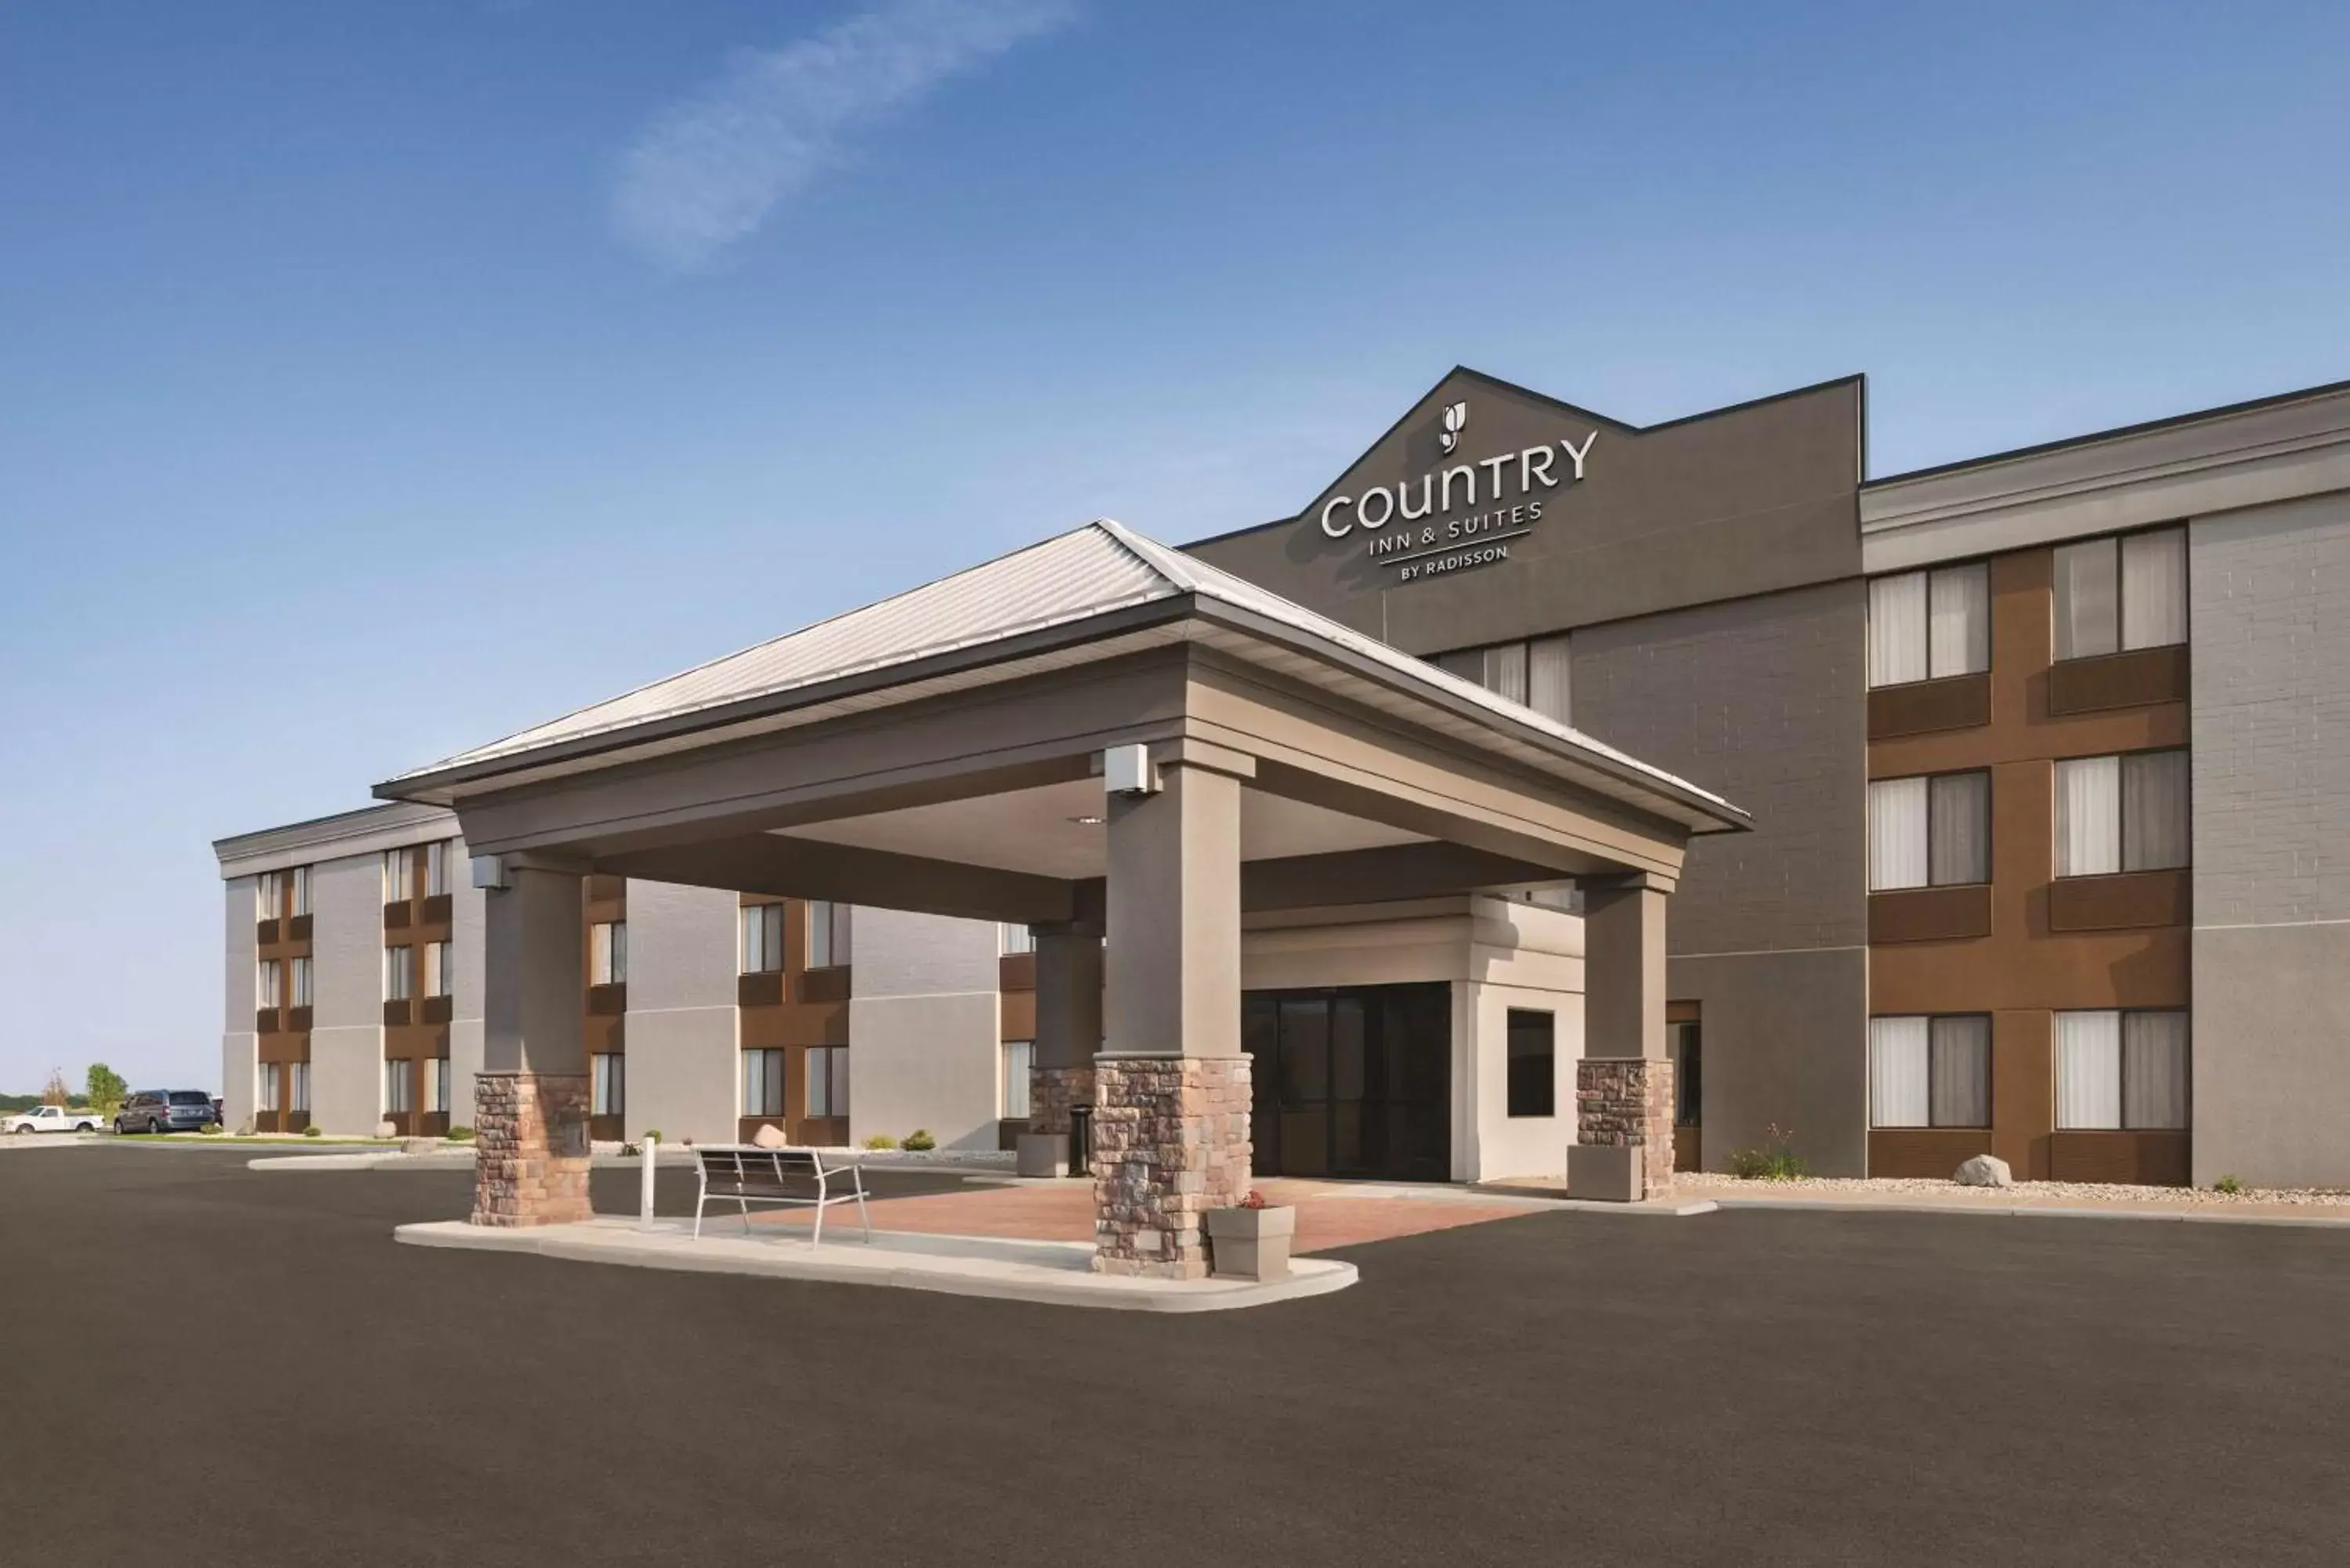 Property Building in Country Inn & Suites by Radisson, Mt. Pleasant-Racine West, WI